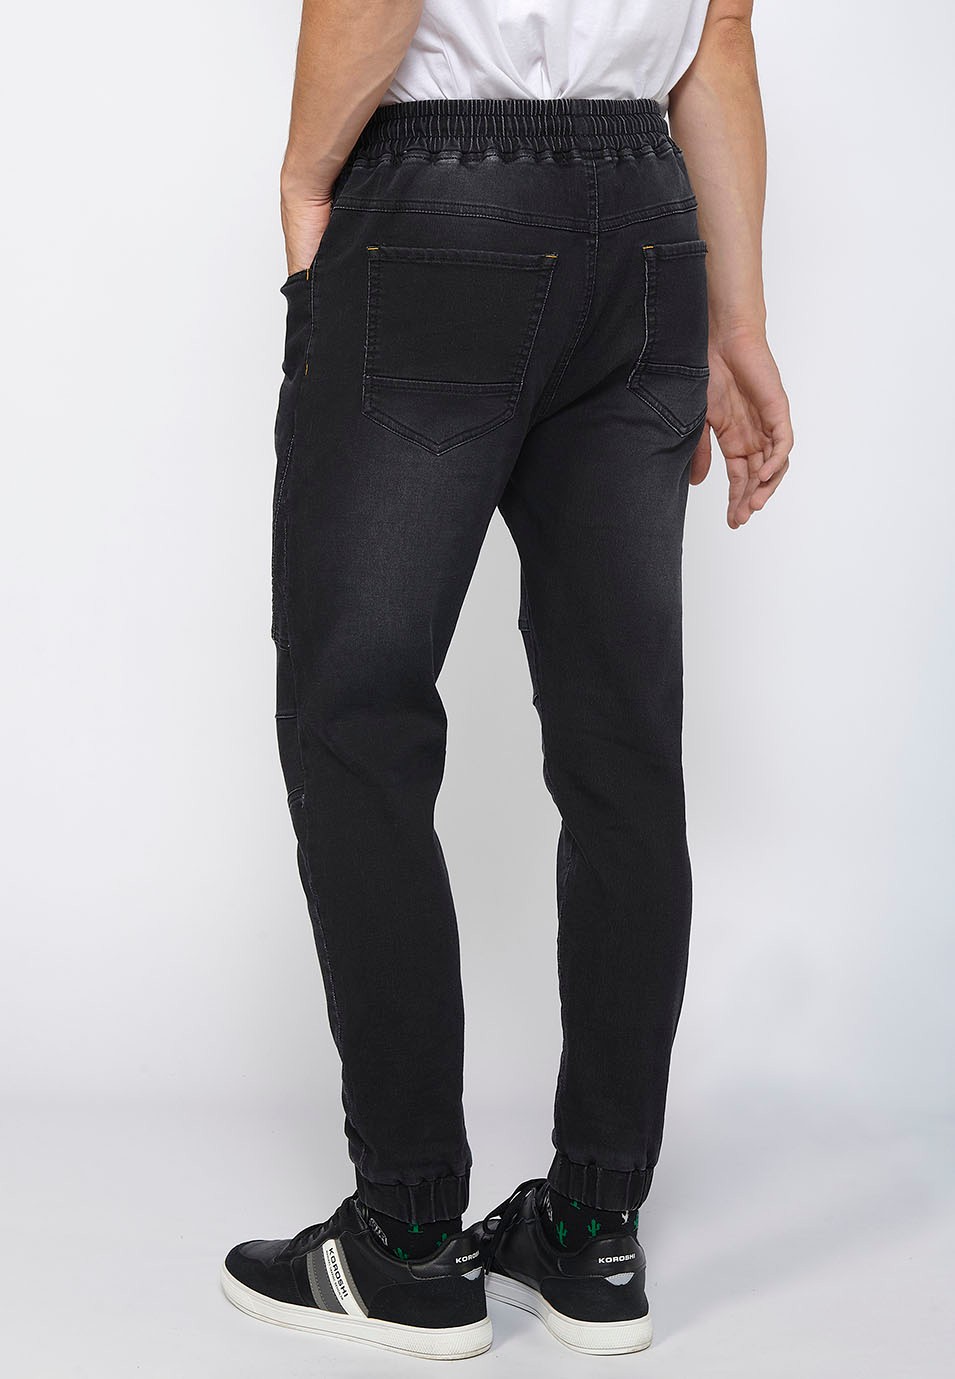 Long slim jogger pants fitted at the ankles with adjustable elastic waist and drawstring in Black for Men 6